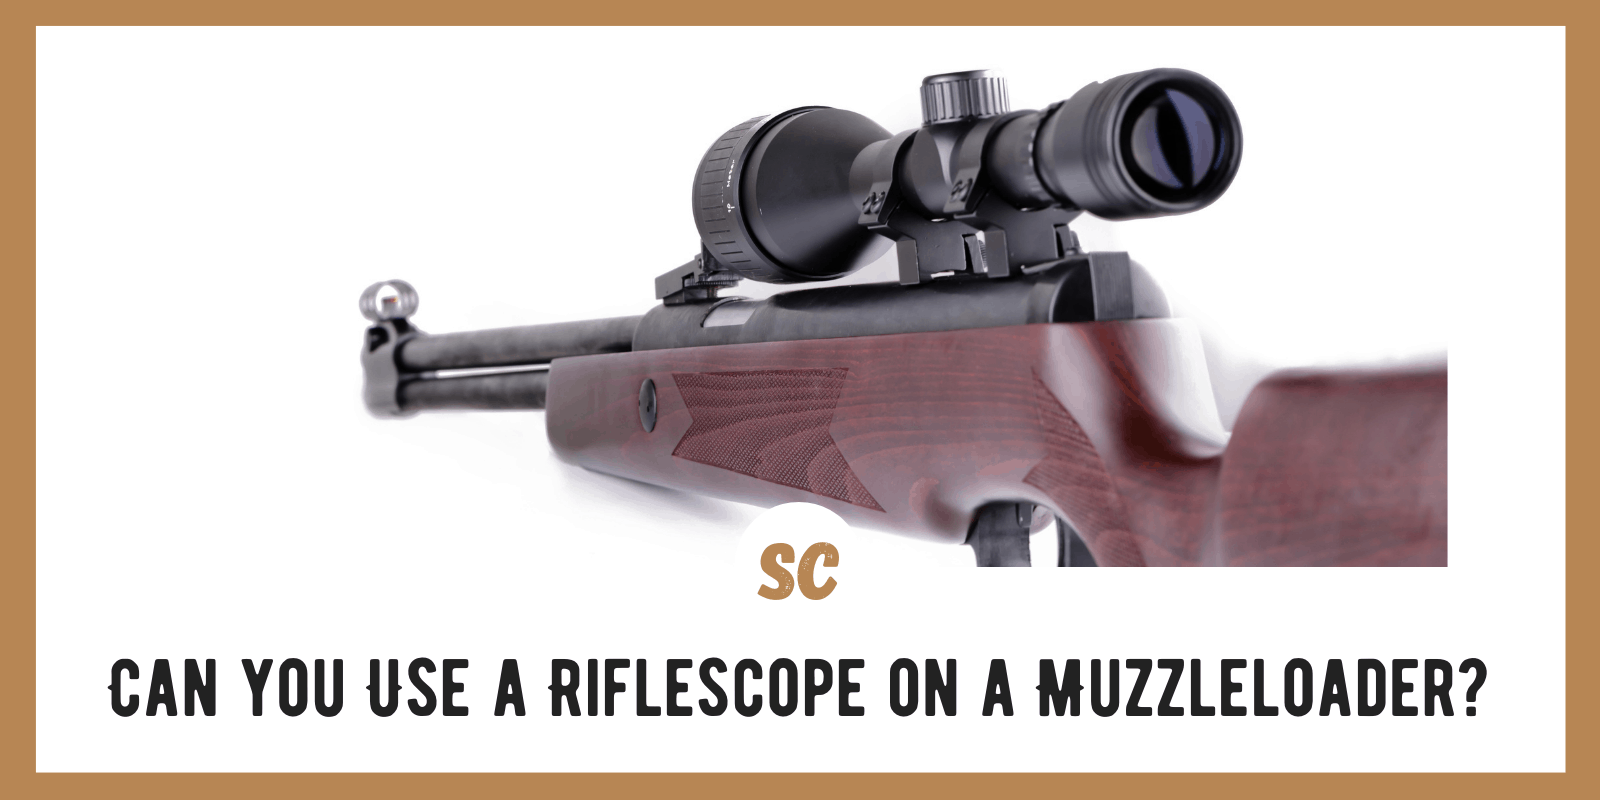 Can you Use a Riflescope on a Muzzleloader?